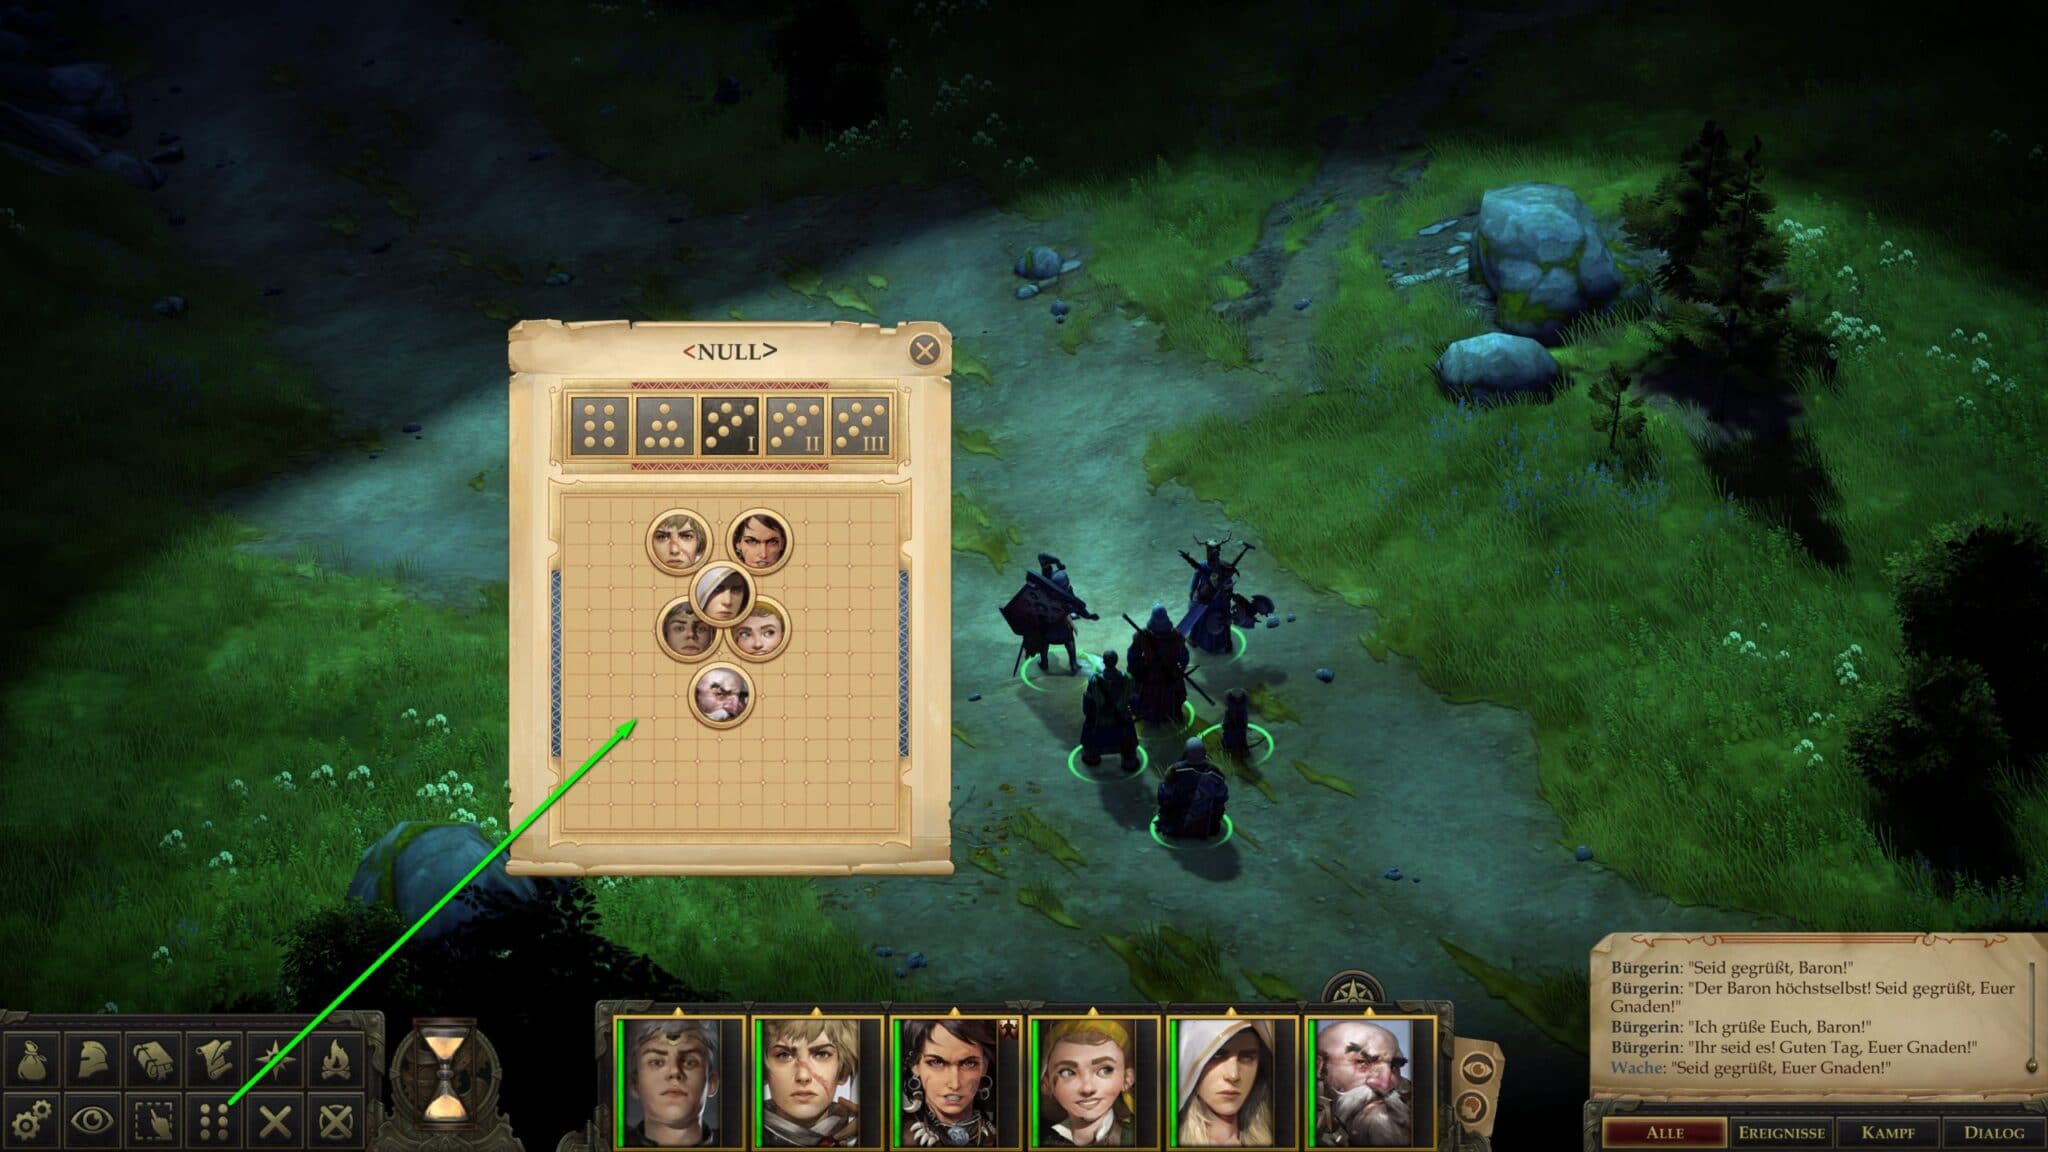 Pathfinder: Kingmaker – The Ultimate Guide ⋆ S4G